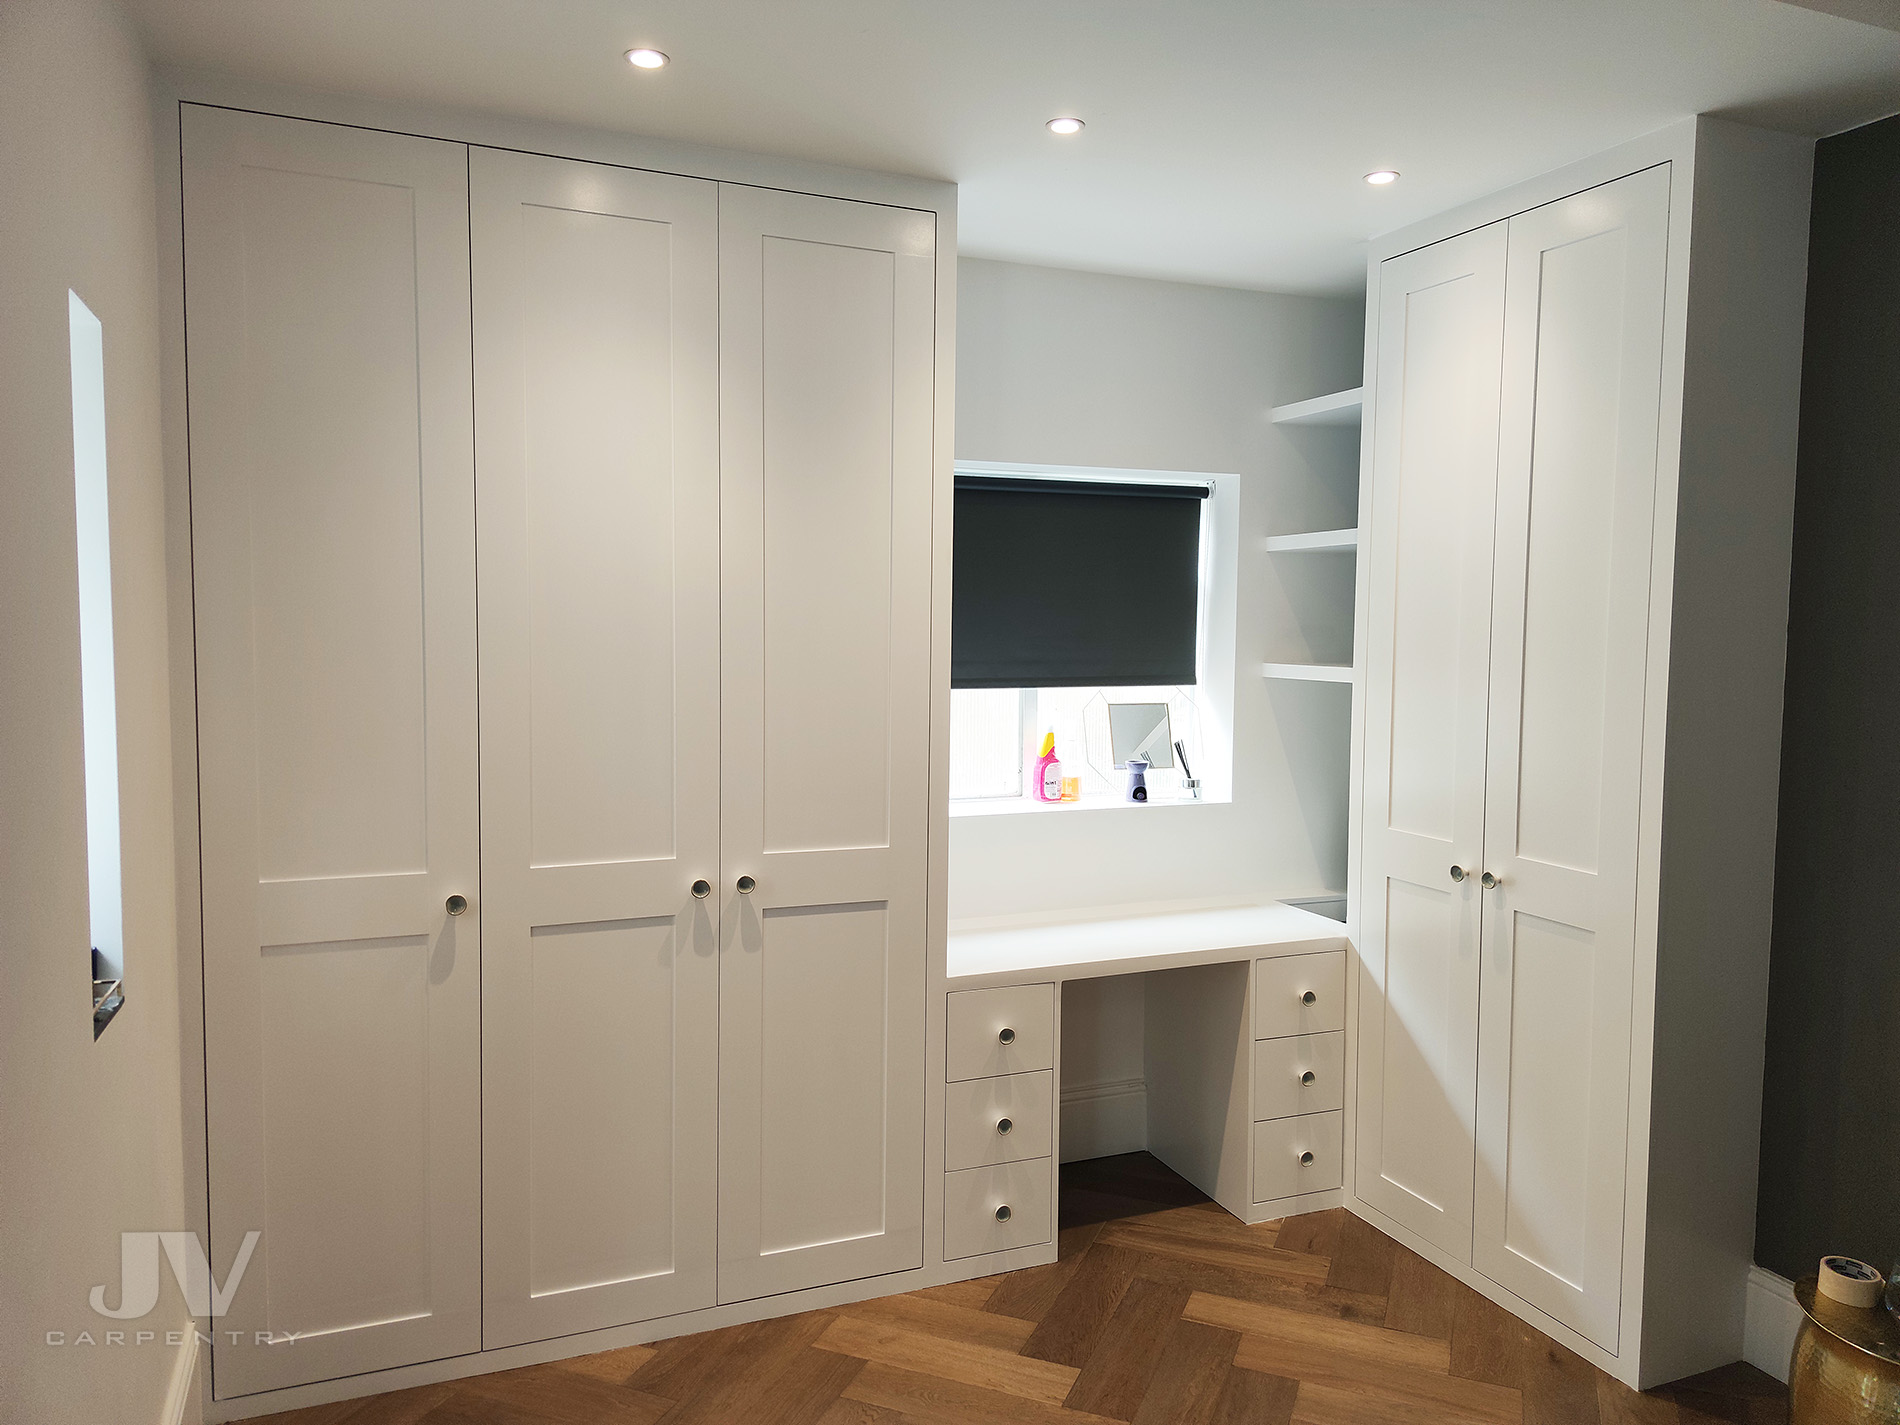 Fitted wardrobe built around window with dressing table